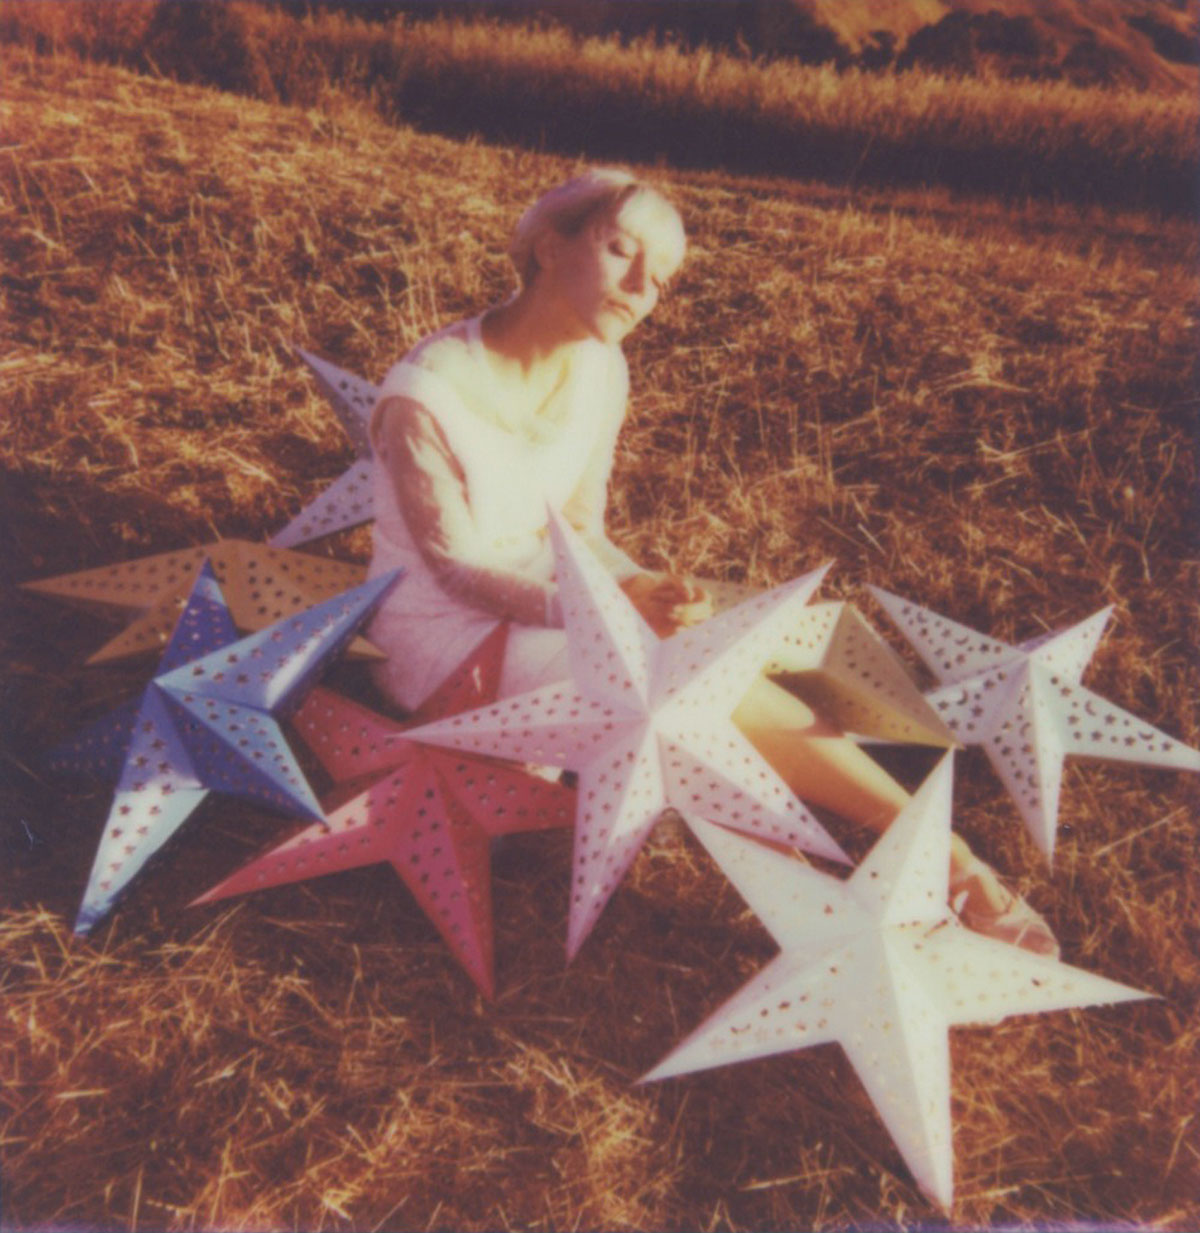 stargirl jerry spinelli analog analog photography film photography POLAROID impossible project girl stars Fair fairy